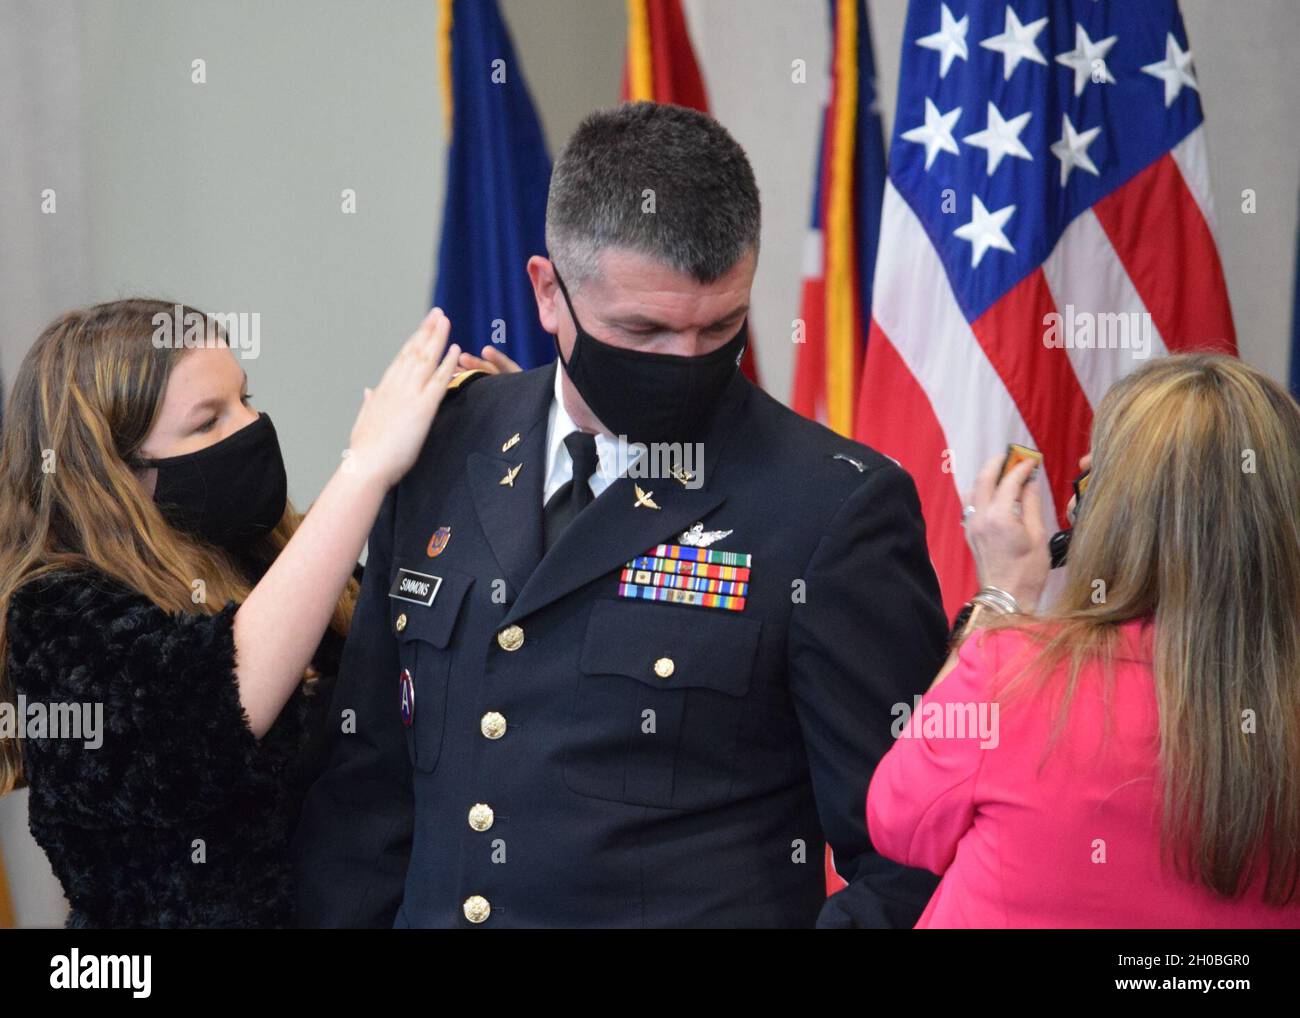 Georgia Army National Guard Col. Barry Simmons receives his new rank from his wife Michelle and daughter Allison during a promotion ceremony at the Clay National Guard Center in Marietta, Ga. Jan. 19, 2021. Stock Photo